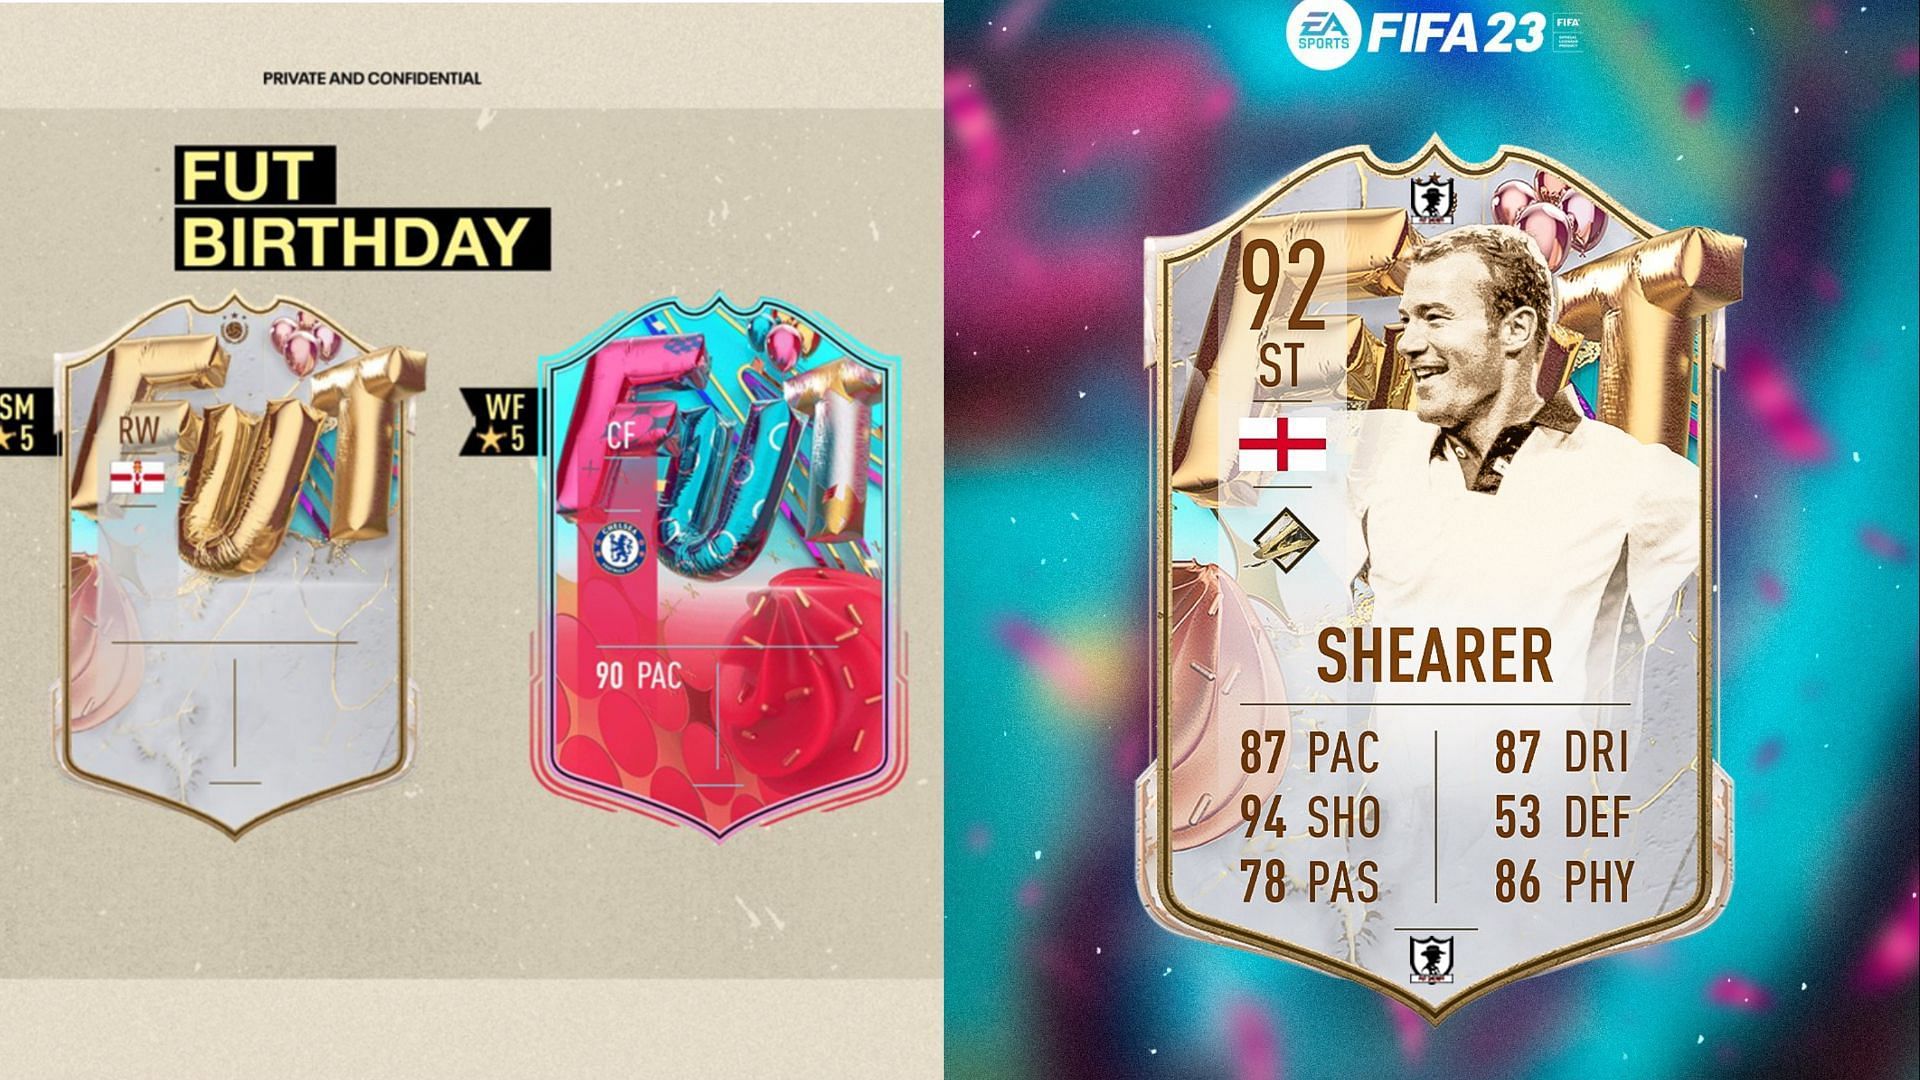 FIFA 23 players might require a lot of fodder to complete the rumored Alan Shearer FUT Birthday Icon SBC (Images via EA Sports, Twitter/FUT Sheriff)